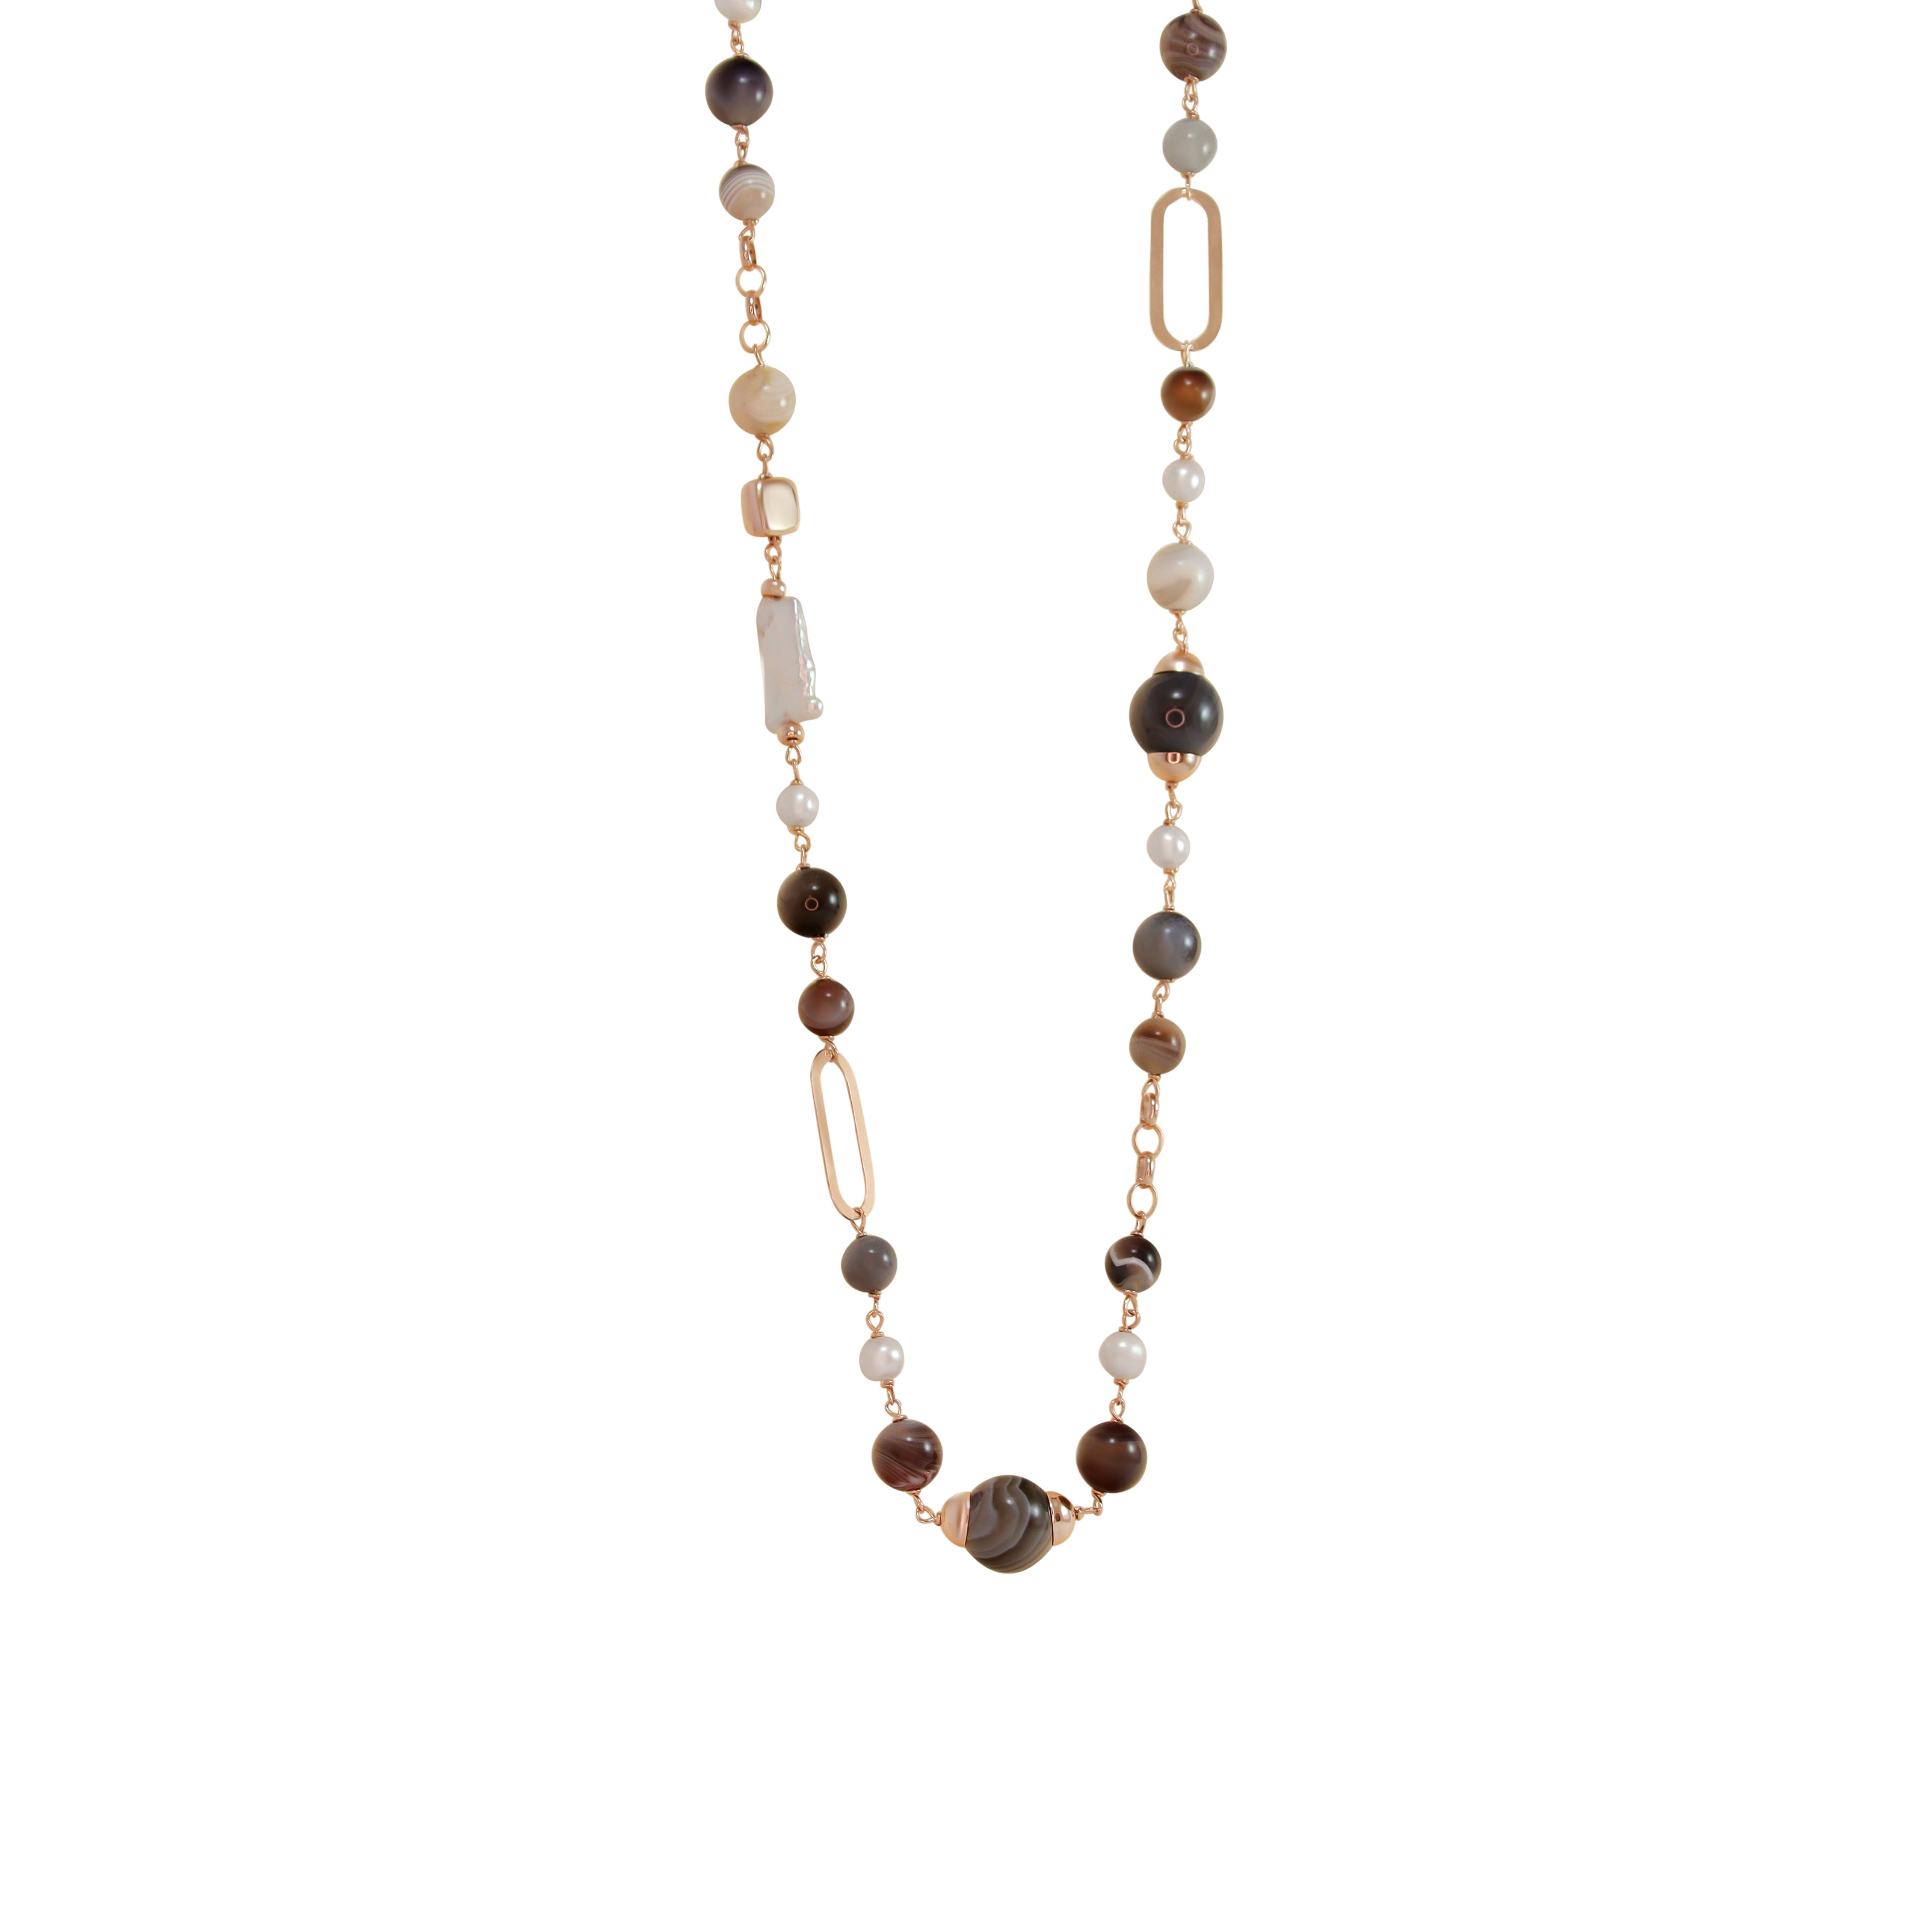 Pearl & Botswana Agate Necklace - 90cm